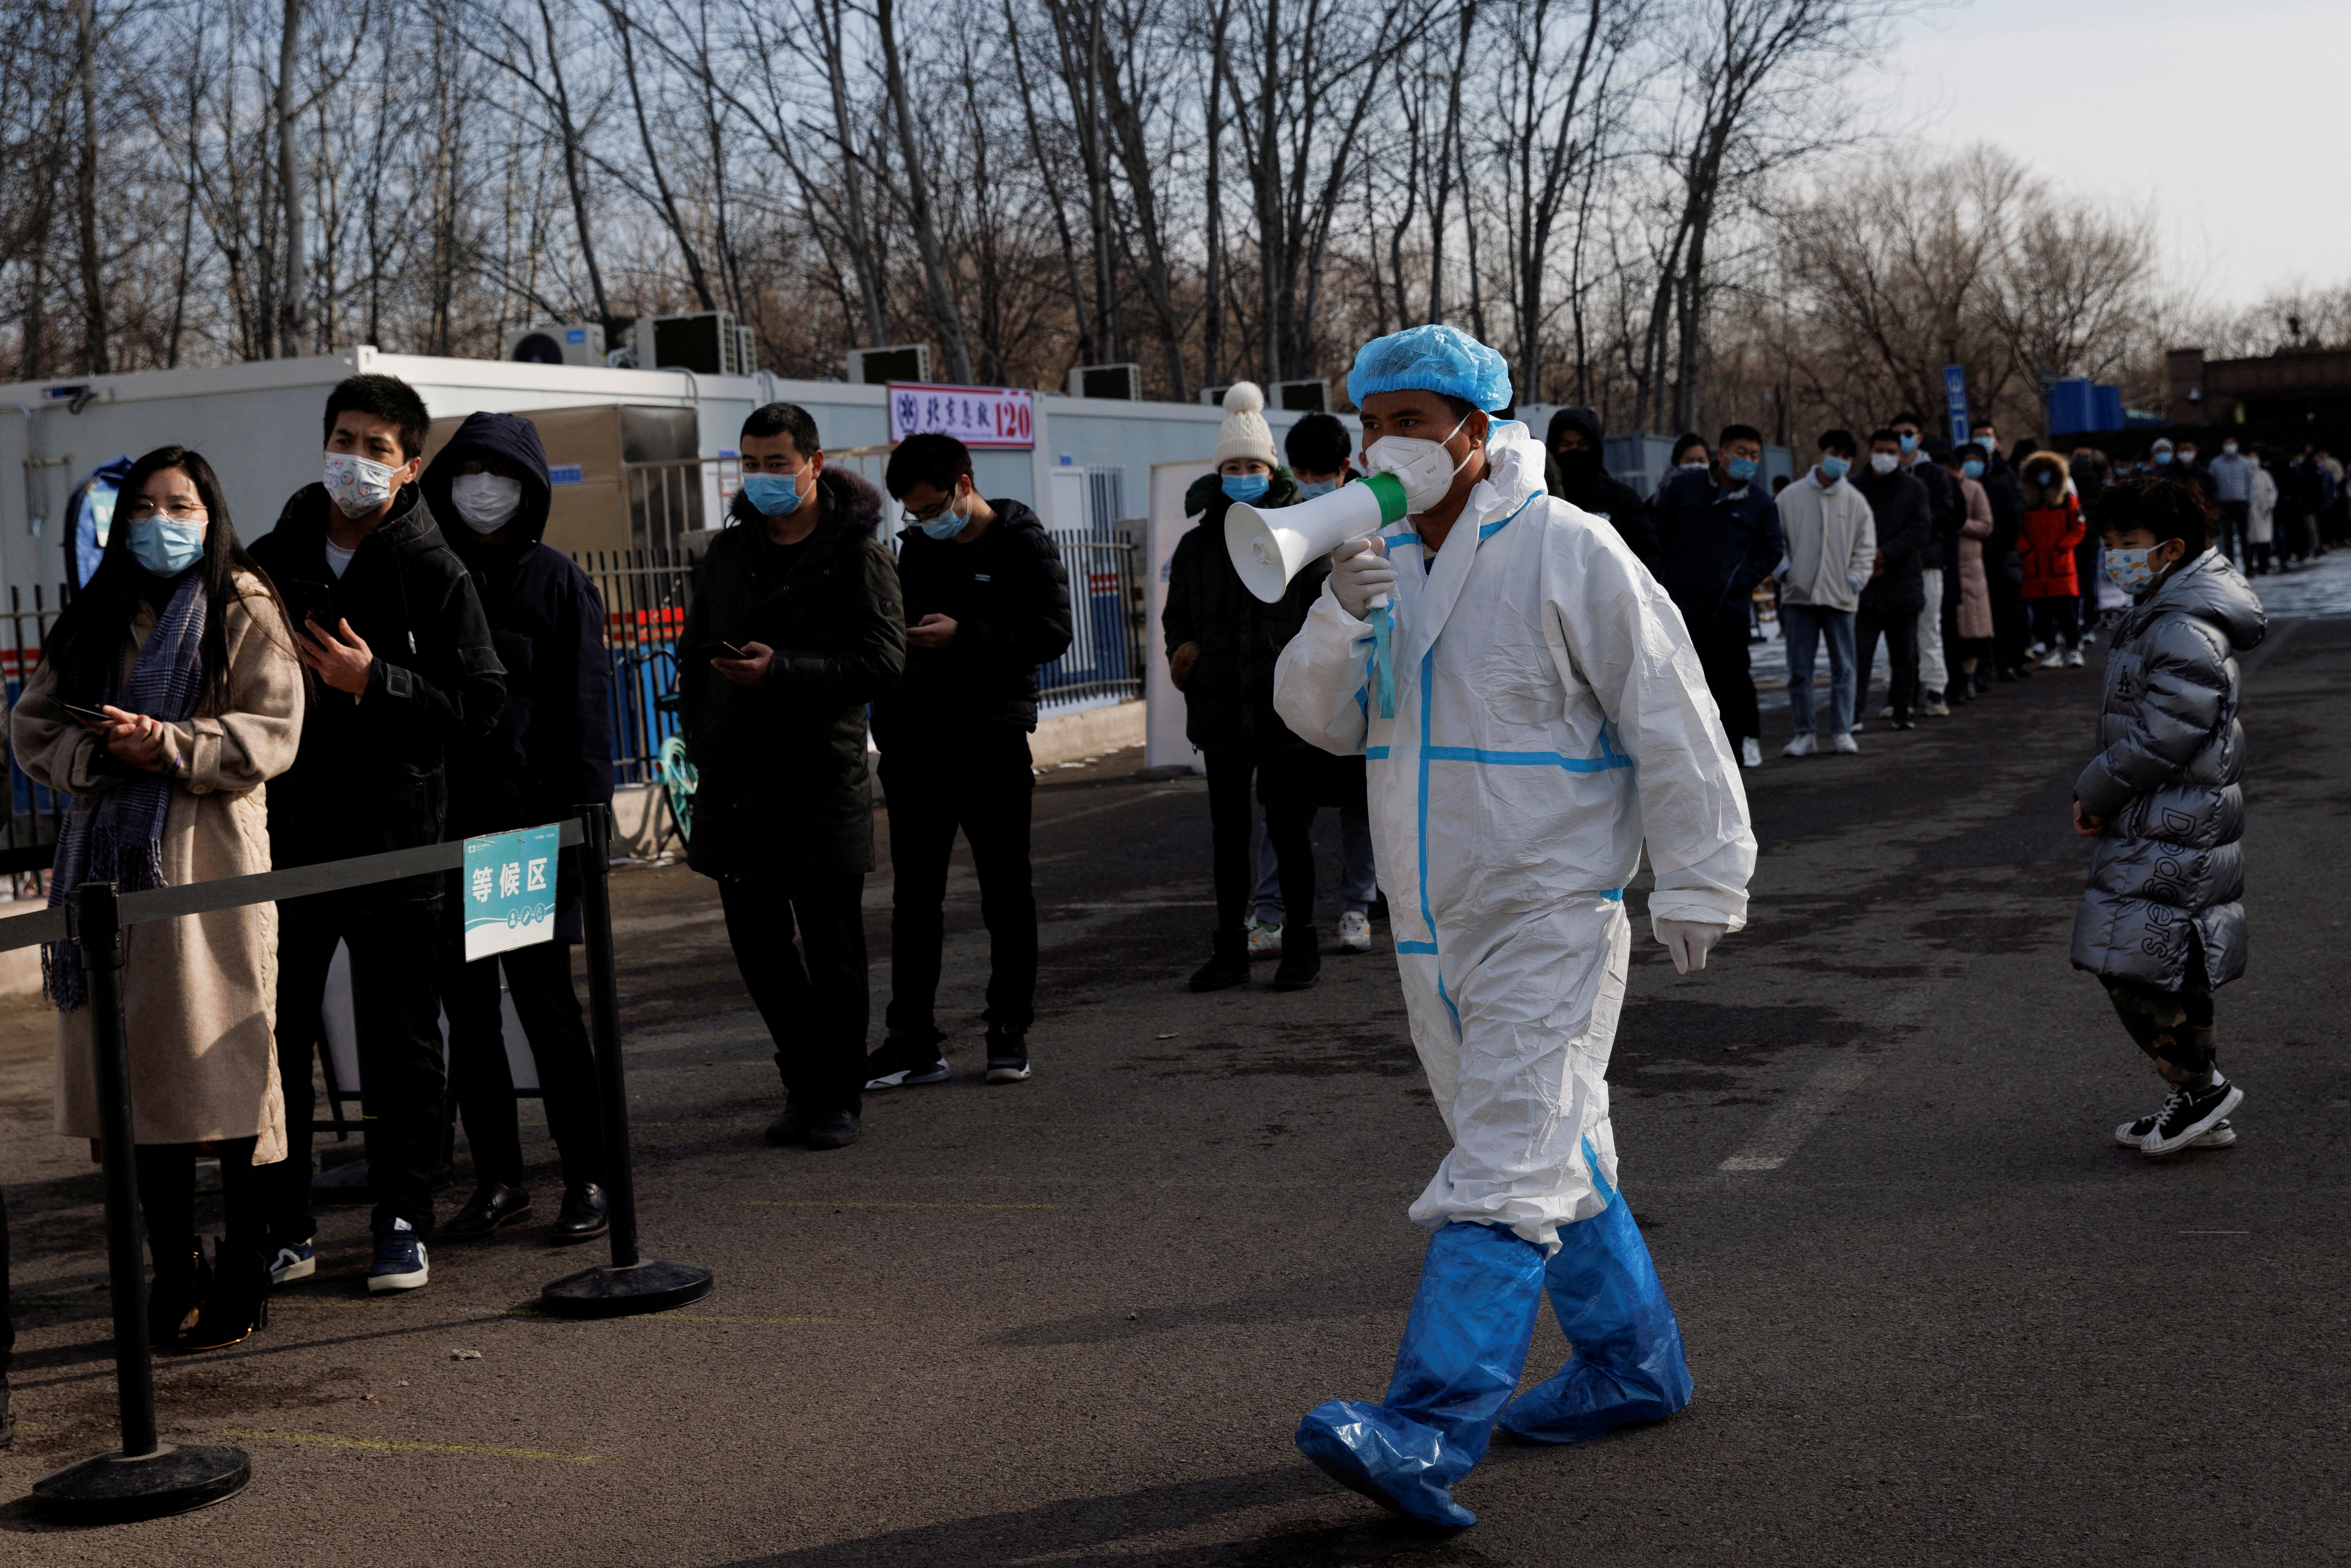 A staff member in a protective suit instructs people who are lining up for a throat swab test at a temporary COVID-19 testing center as the coronavirus disease (COVID-19) continues in Beijing